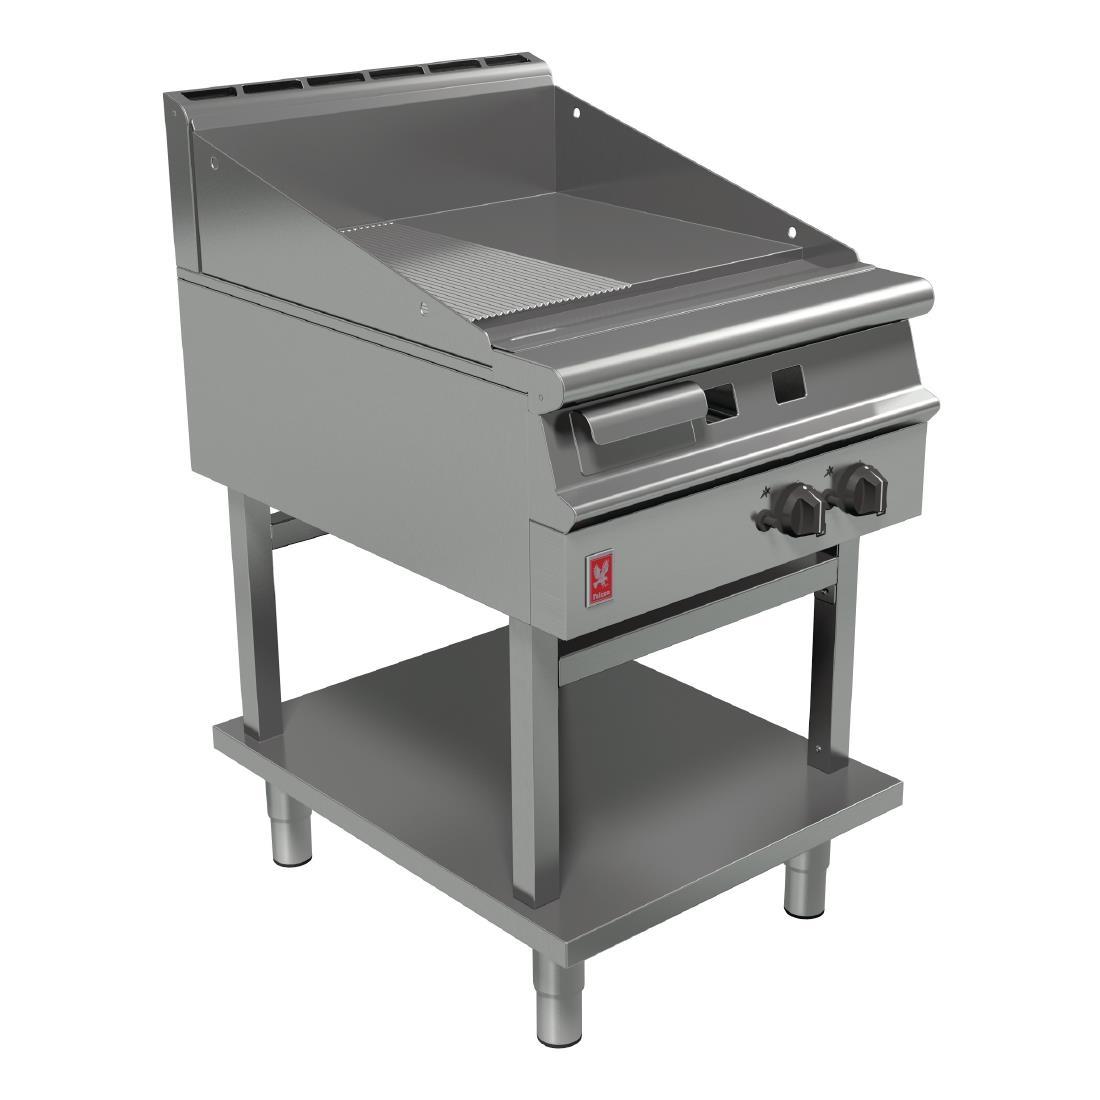 Falcon Dominator Plus 600mm Wide Half Ribbed LPG Griddle on Fixed Stand G3641R - GP045-P  - 1